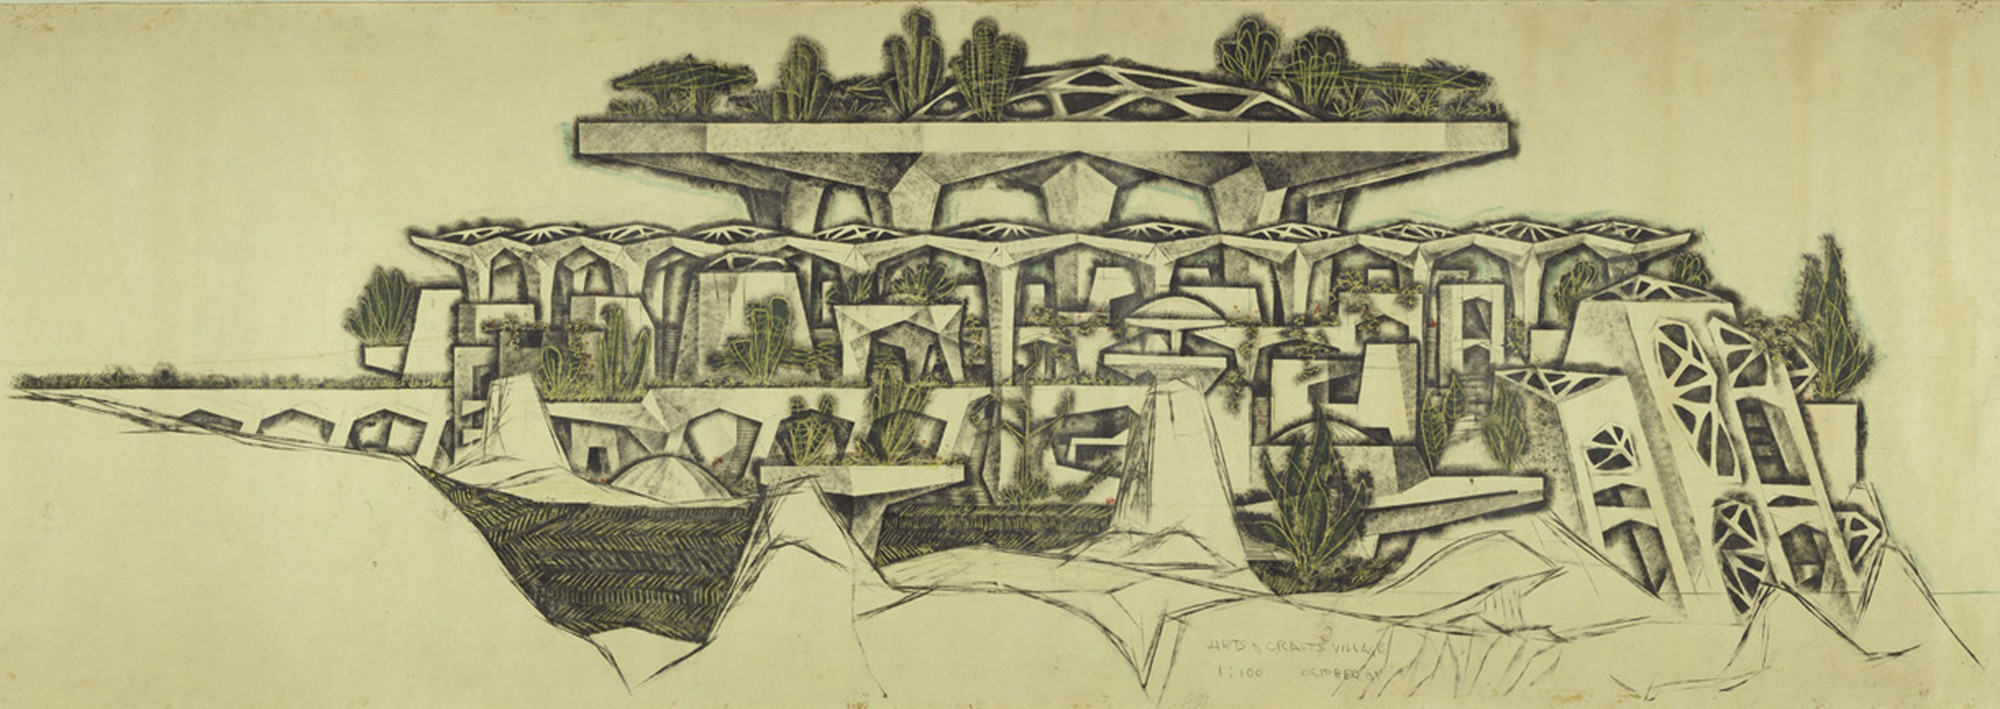 Detail of the market of Mesa City, as designed by Paolo Soleri, 1961. Credit: Cosanti Foundation/Soleri Archives/David DeGomez